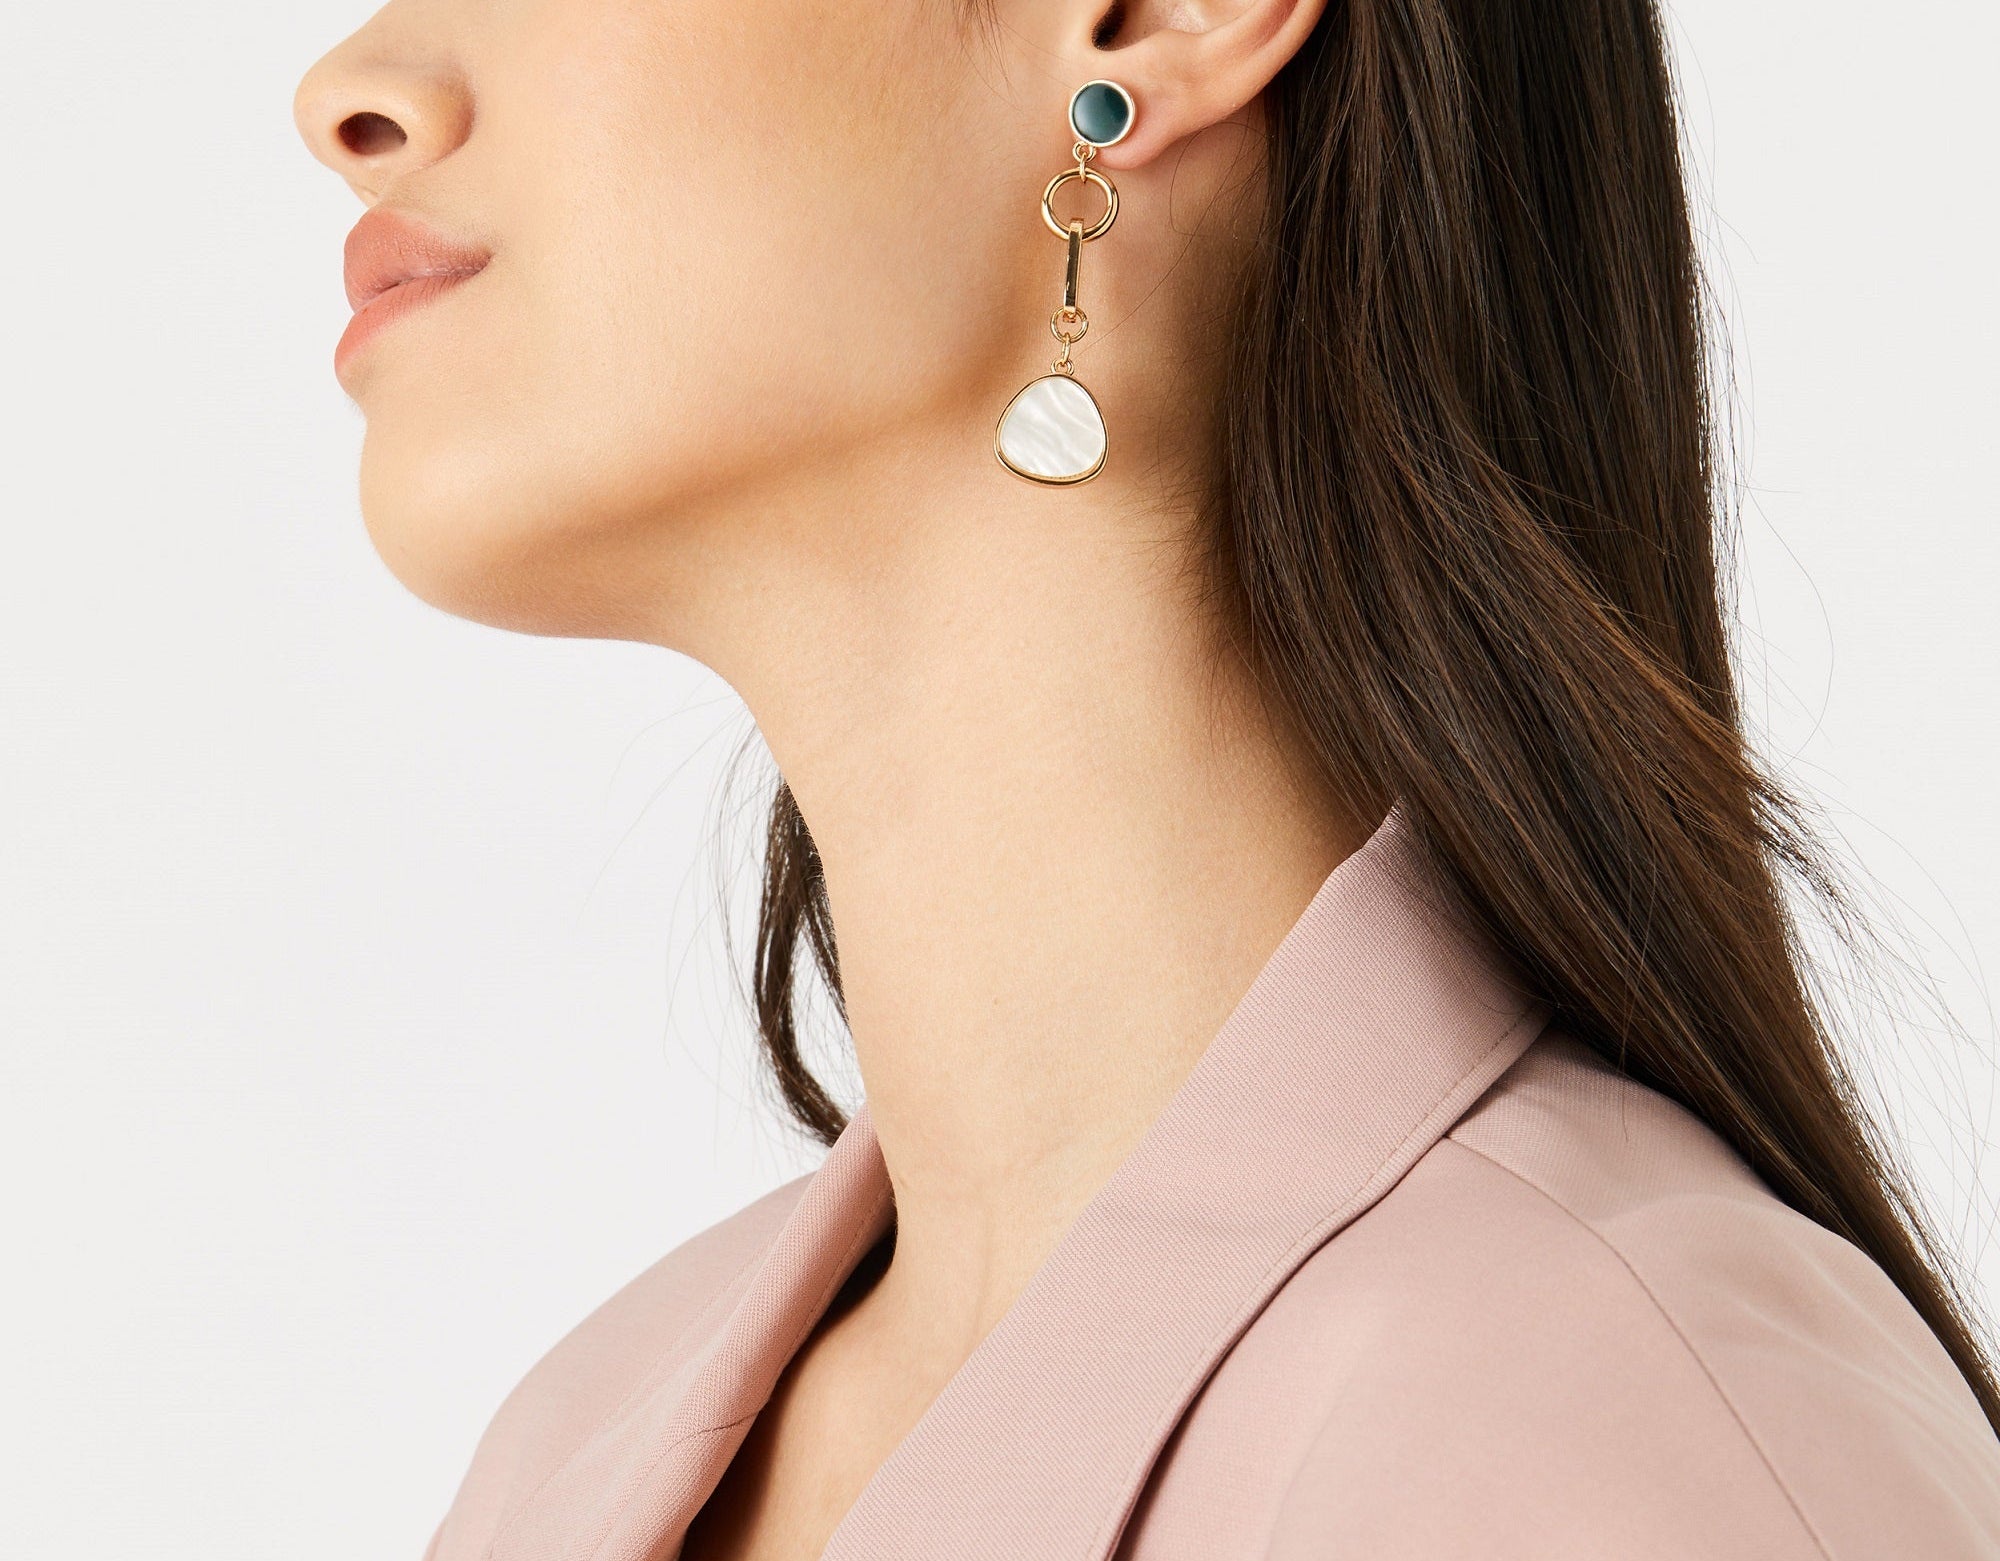 Accessorize London Women's Reconnected Stone & Chain Statement Earrings